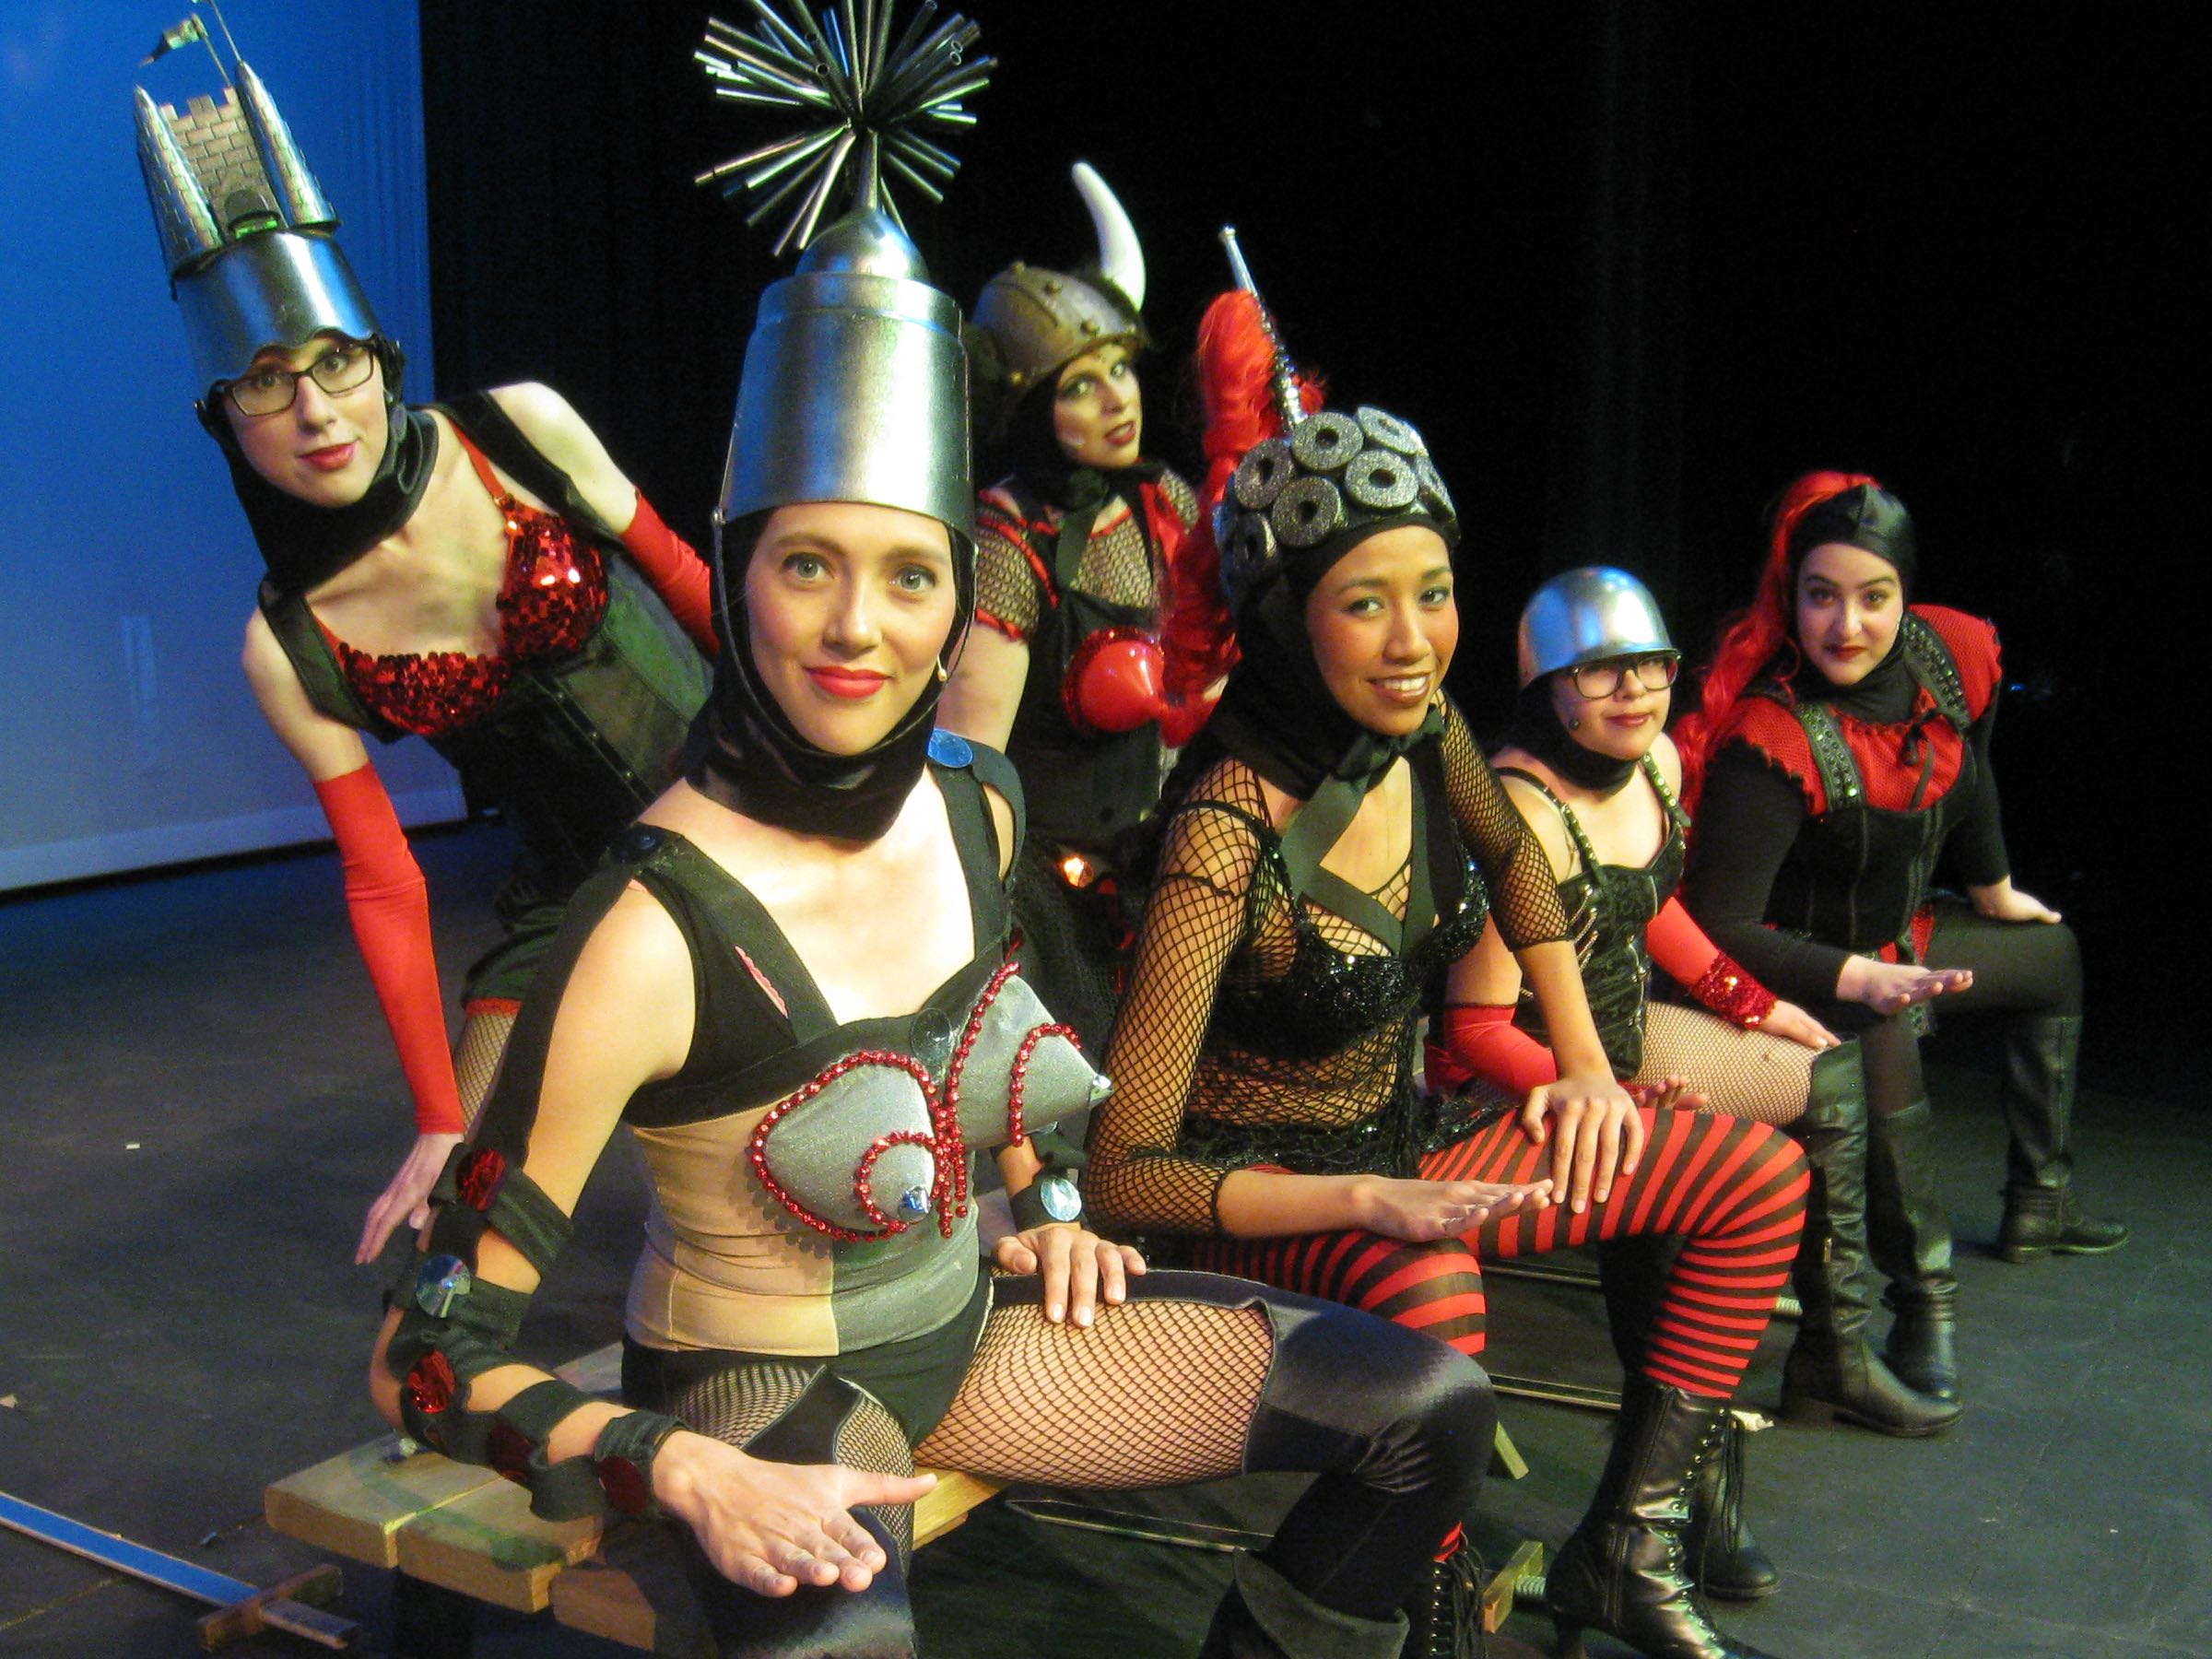 Pippin warriors from the musical